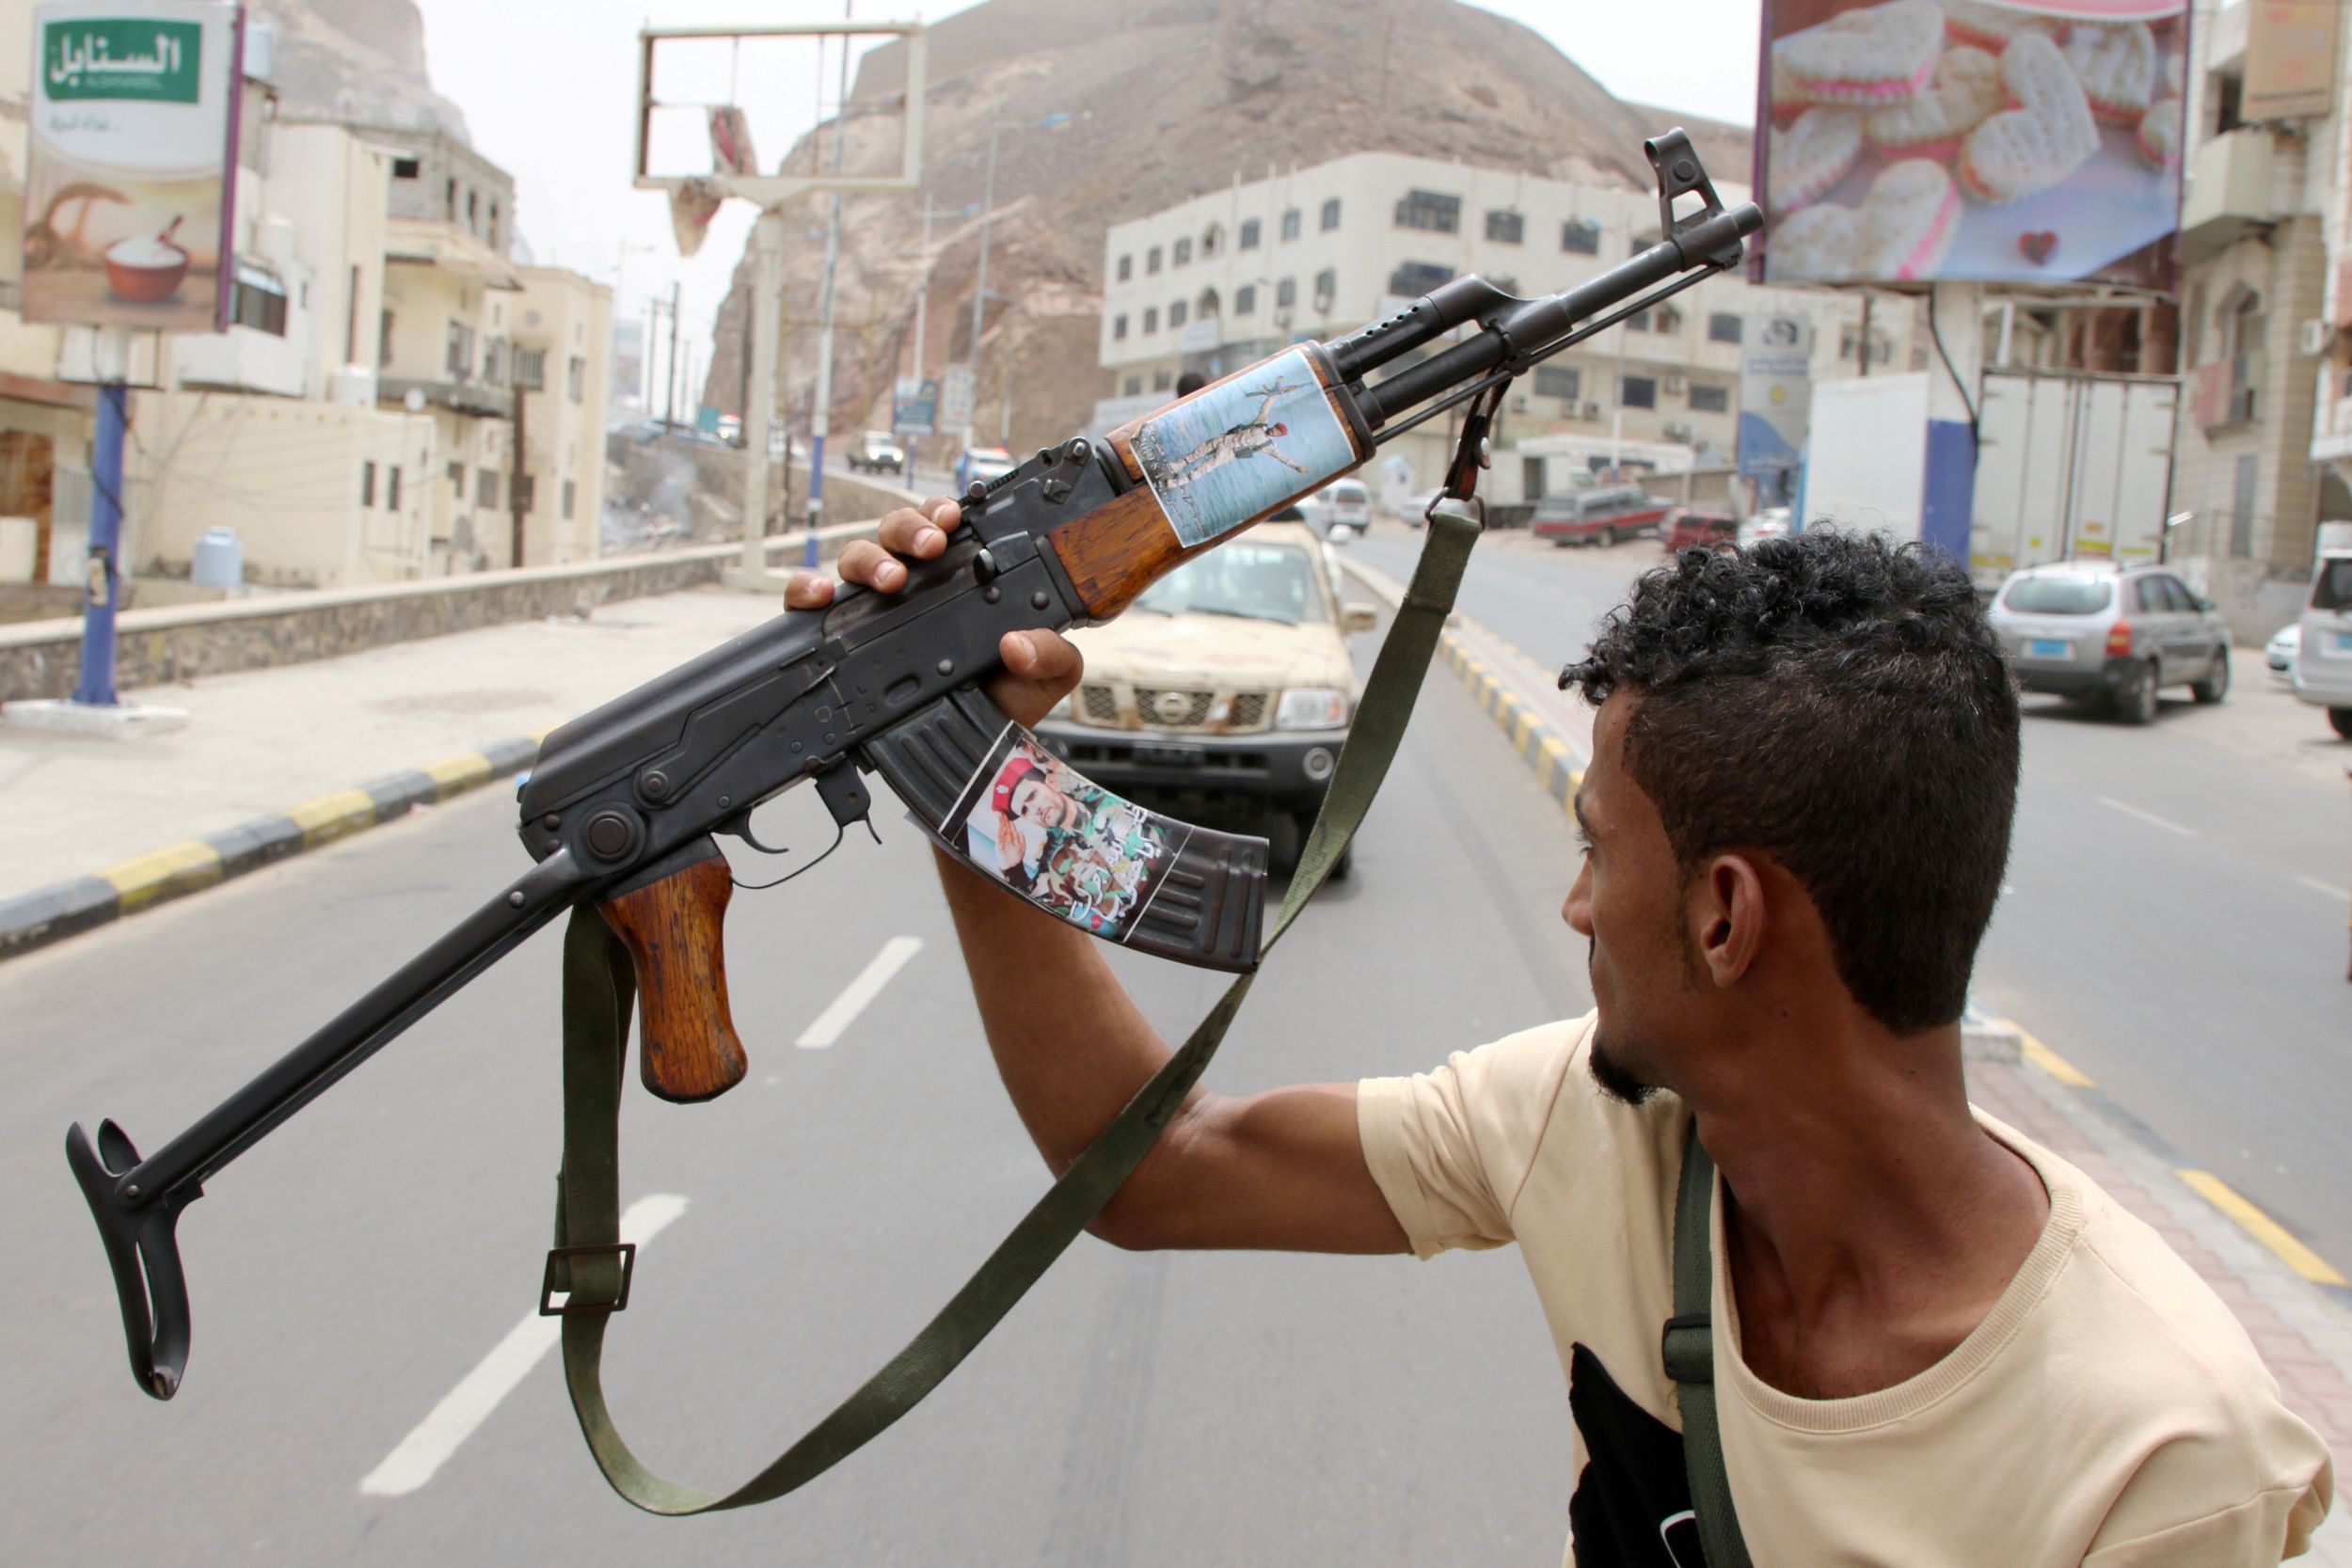 What We're Watching: Yemen’s Fractured Alliances and An Ominous Russian Explosion